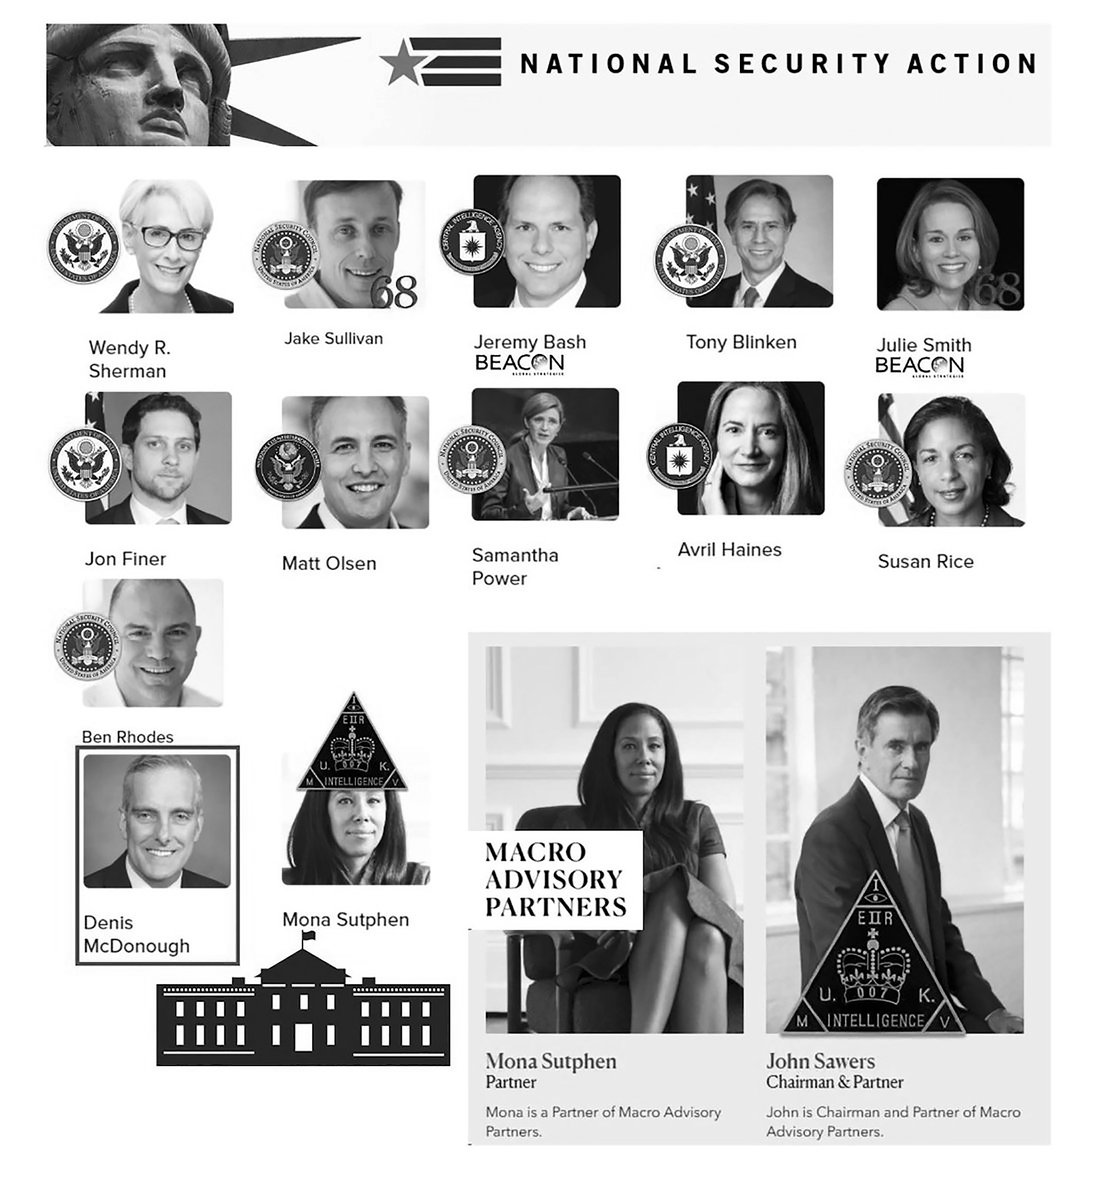 National Security Action Staff Has Increased Dramatically, Currently Listing 88 Individuals Under 'Who We Are'.[They] Are Preparing For 'War', The November 3, 2020 Presidential Election.